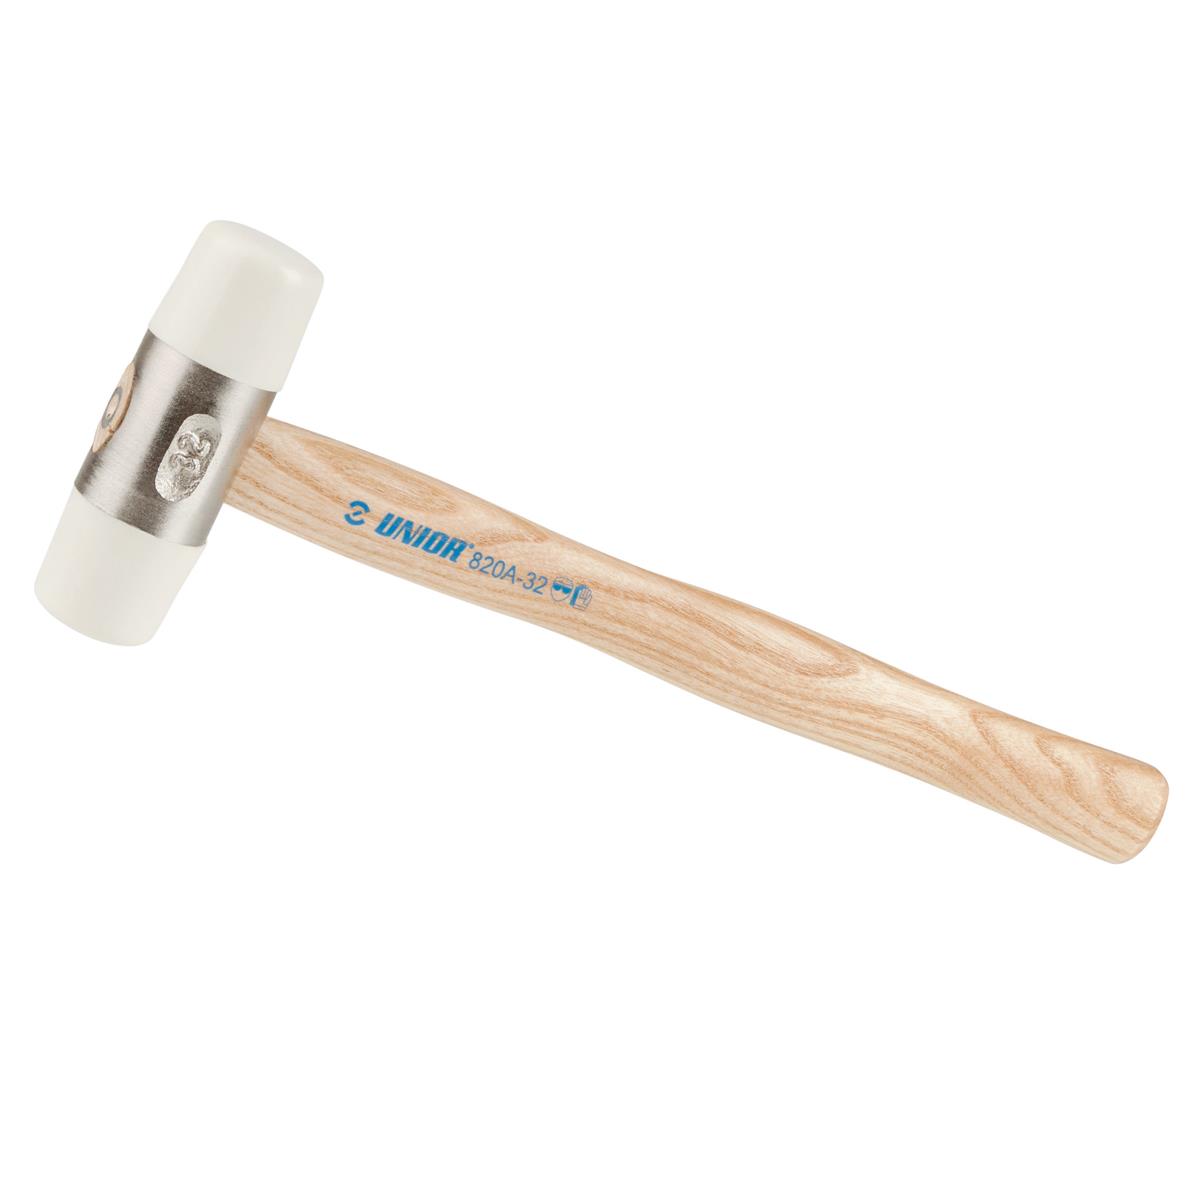 Unior Mallet  With Wooden Handle And Changeable Attachments